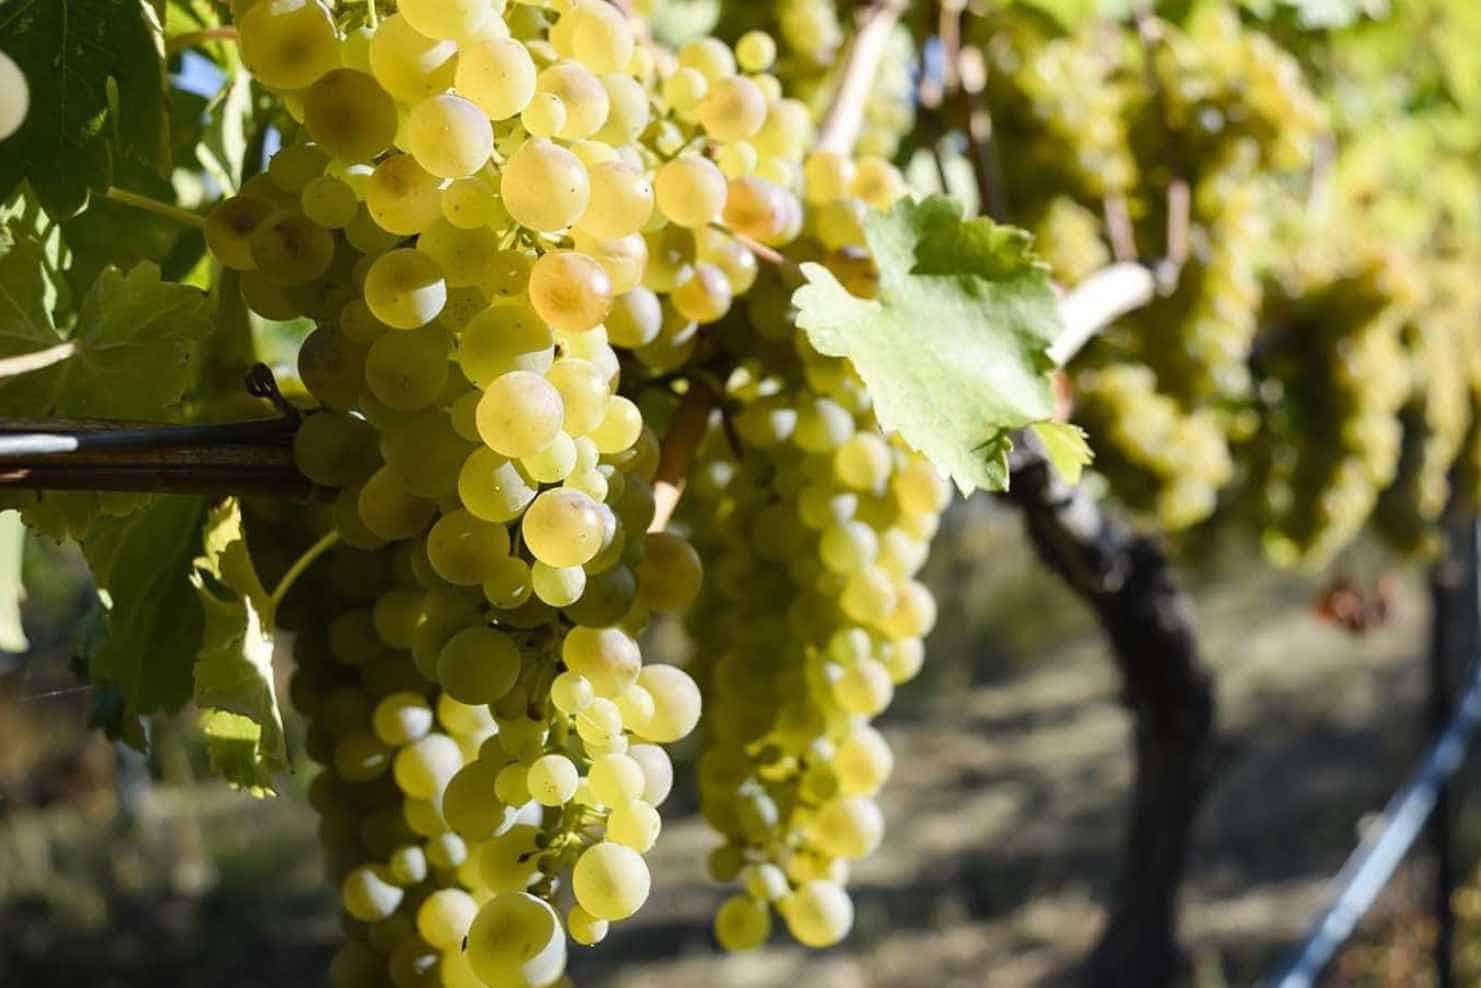 History of Viognier wines